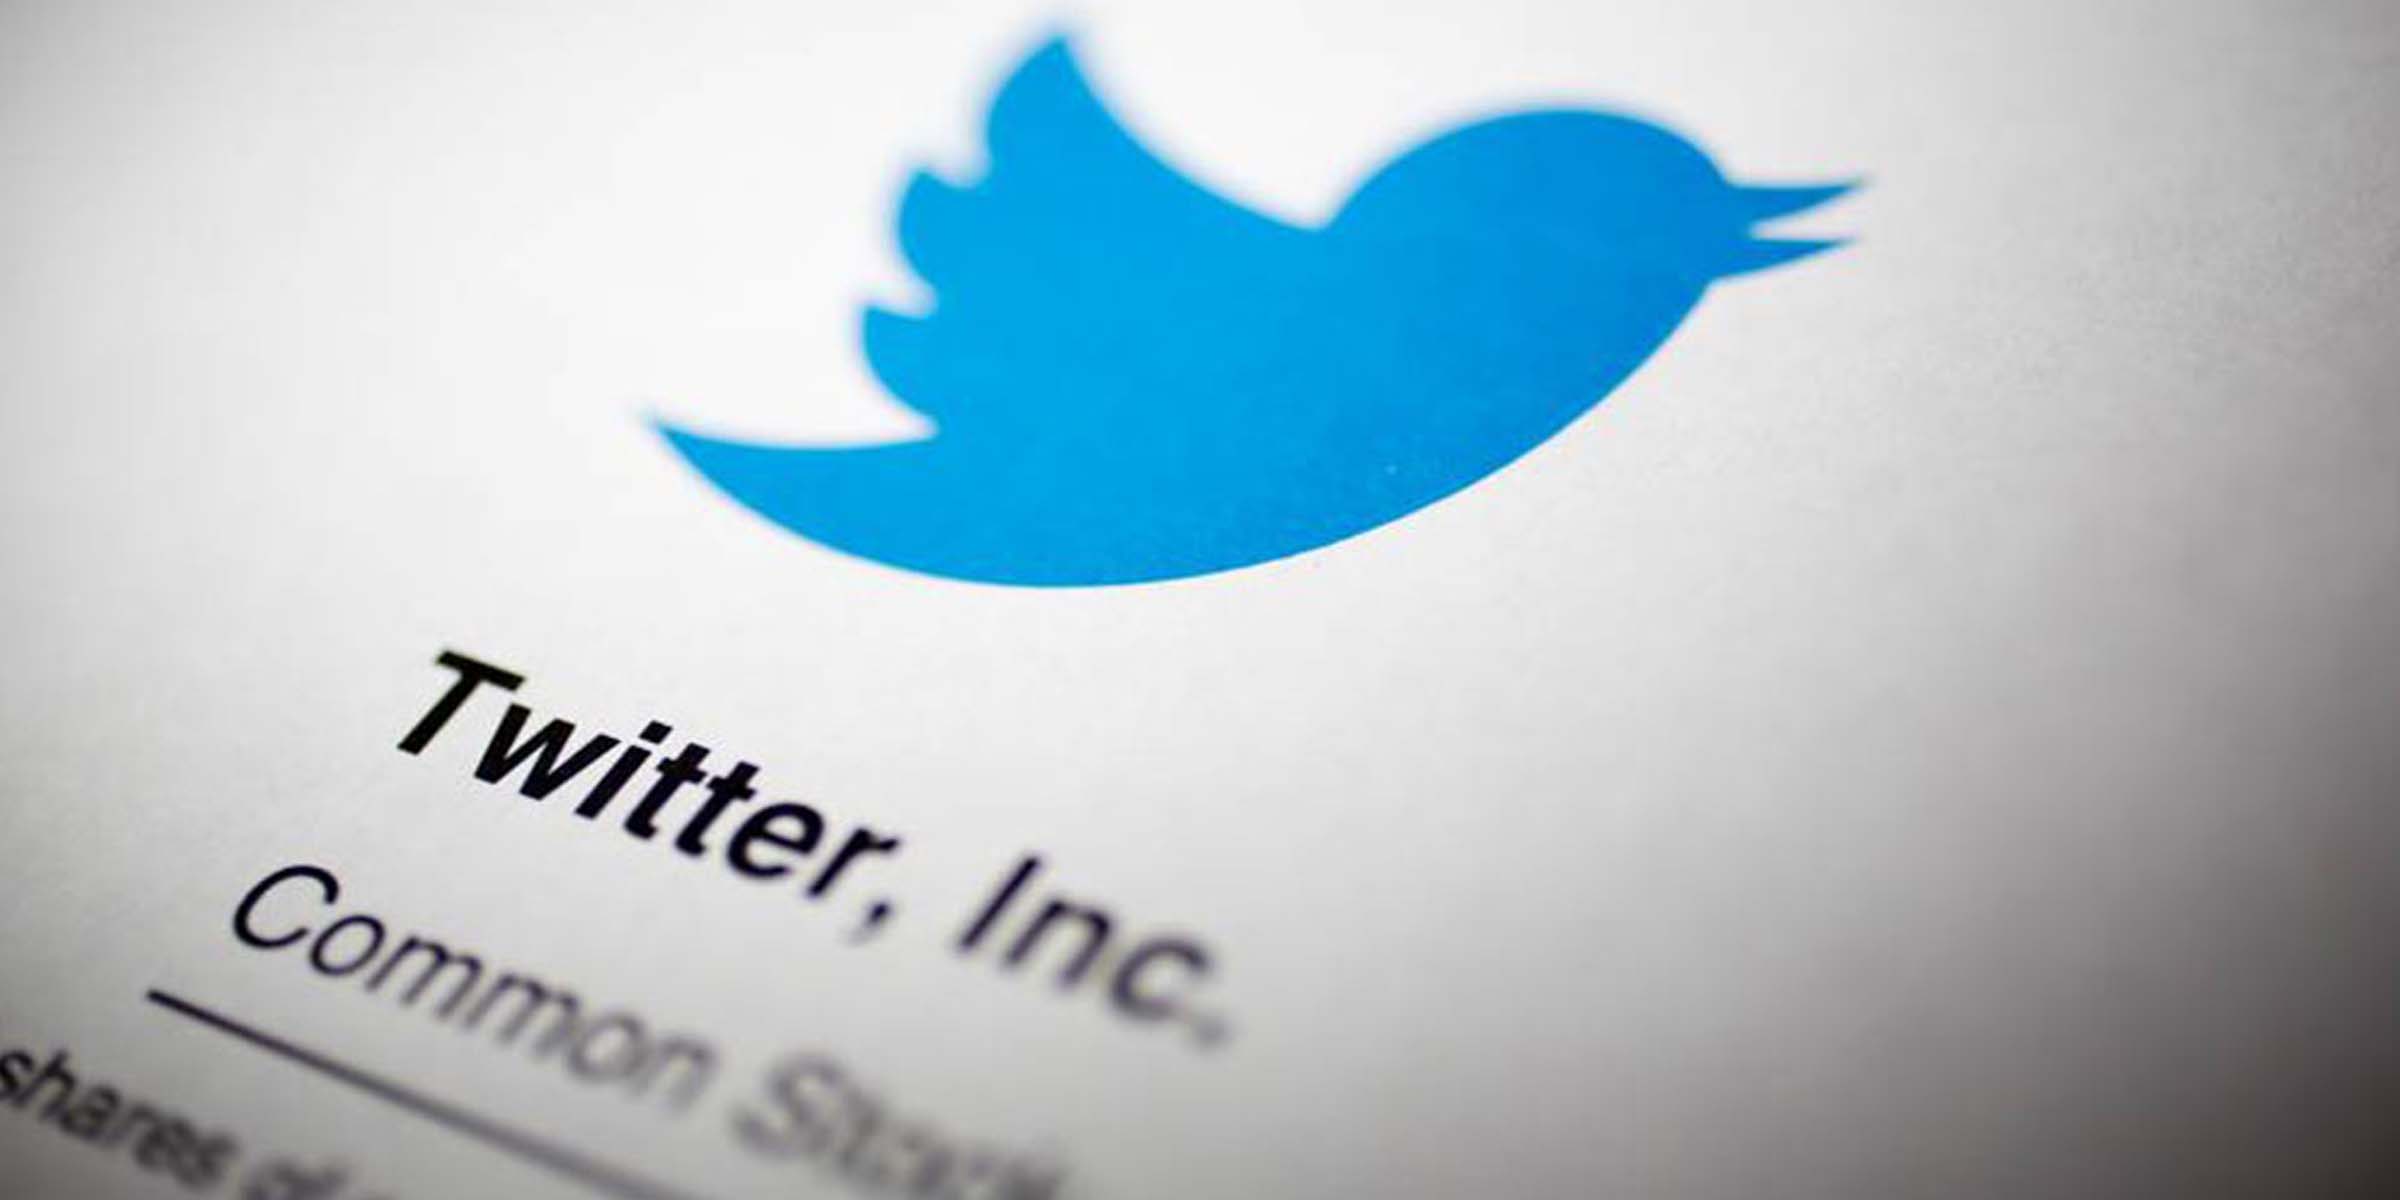 Twitter COO Resigns to Become CEO of SoFi